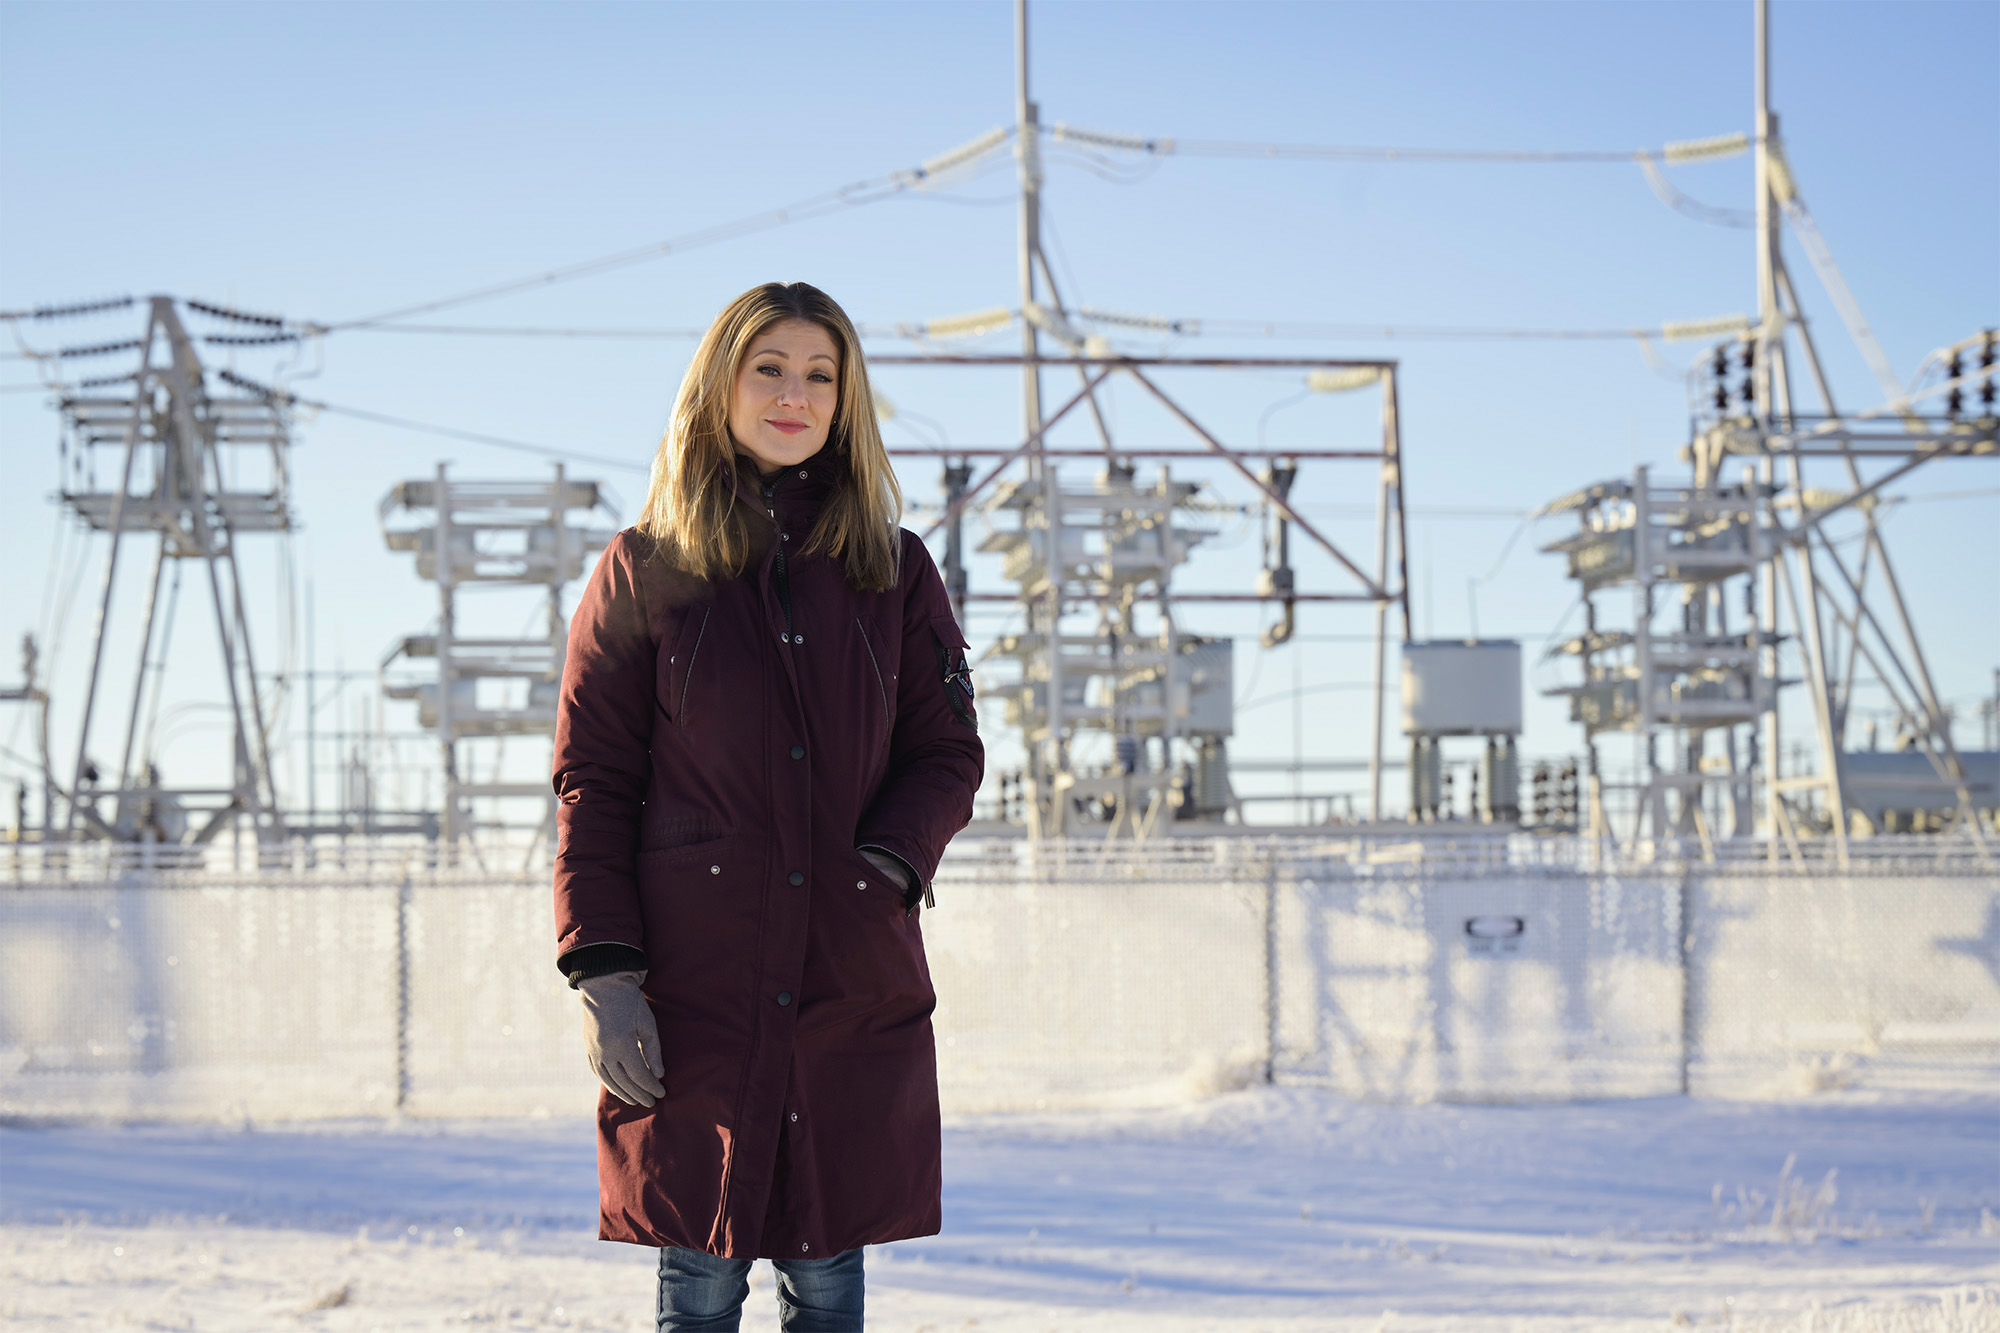 Social scientist Dr. Amber Fletcher is part of an $8.75 million international project called the U.S.-Canada Center on Climate-Resilient Western Interconnected Grid, where she will look at how people are disproportionately affected by disasters caused by power loss. (Photo by Trevor Hopkin)